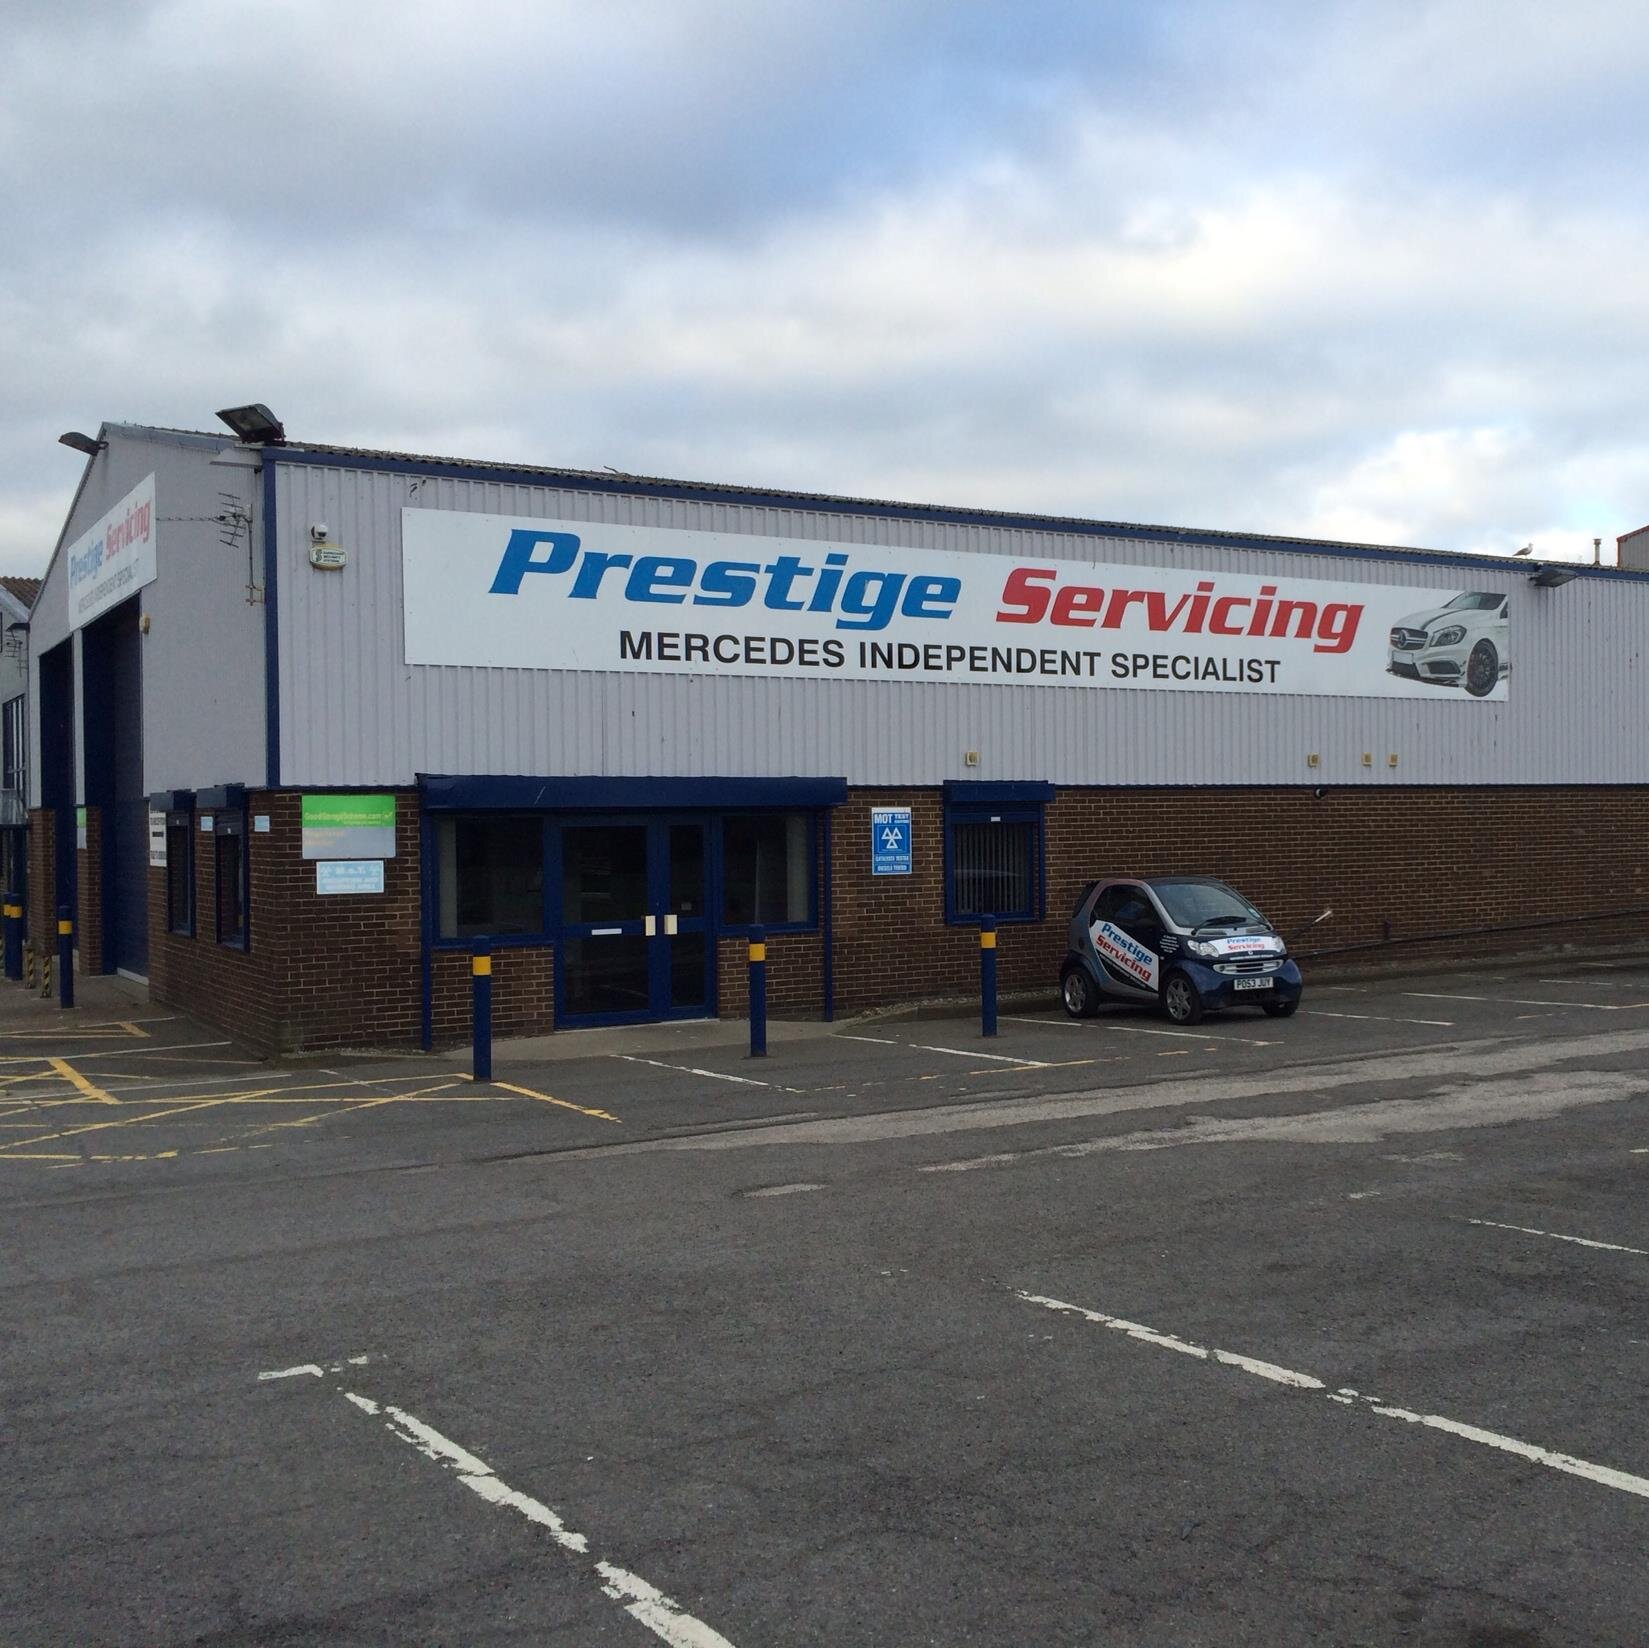 The North-East's Leading Mercedes Specalist for Servicing, Repairs and Sales.